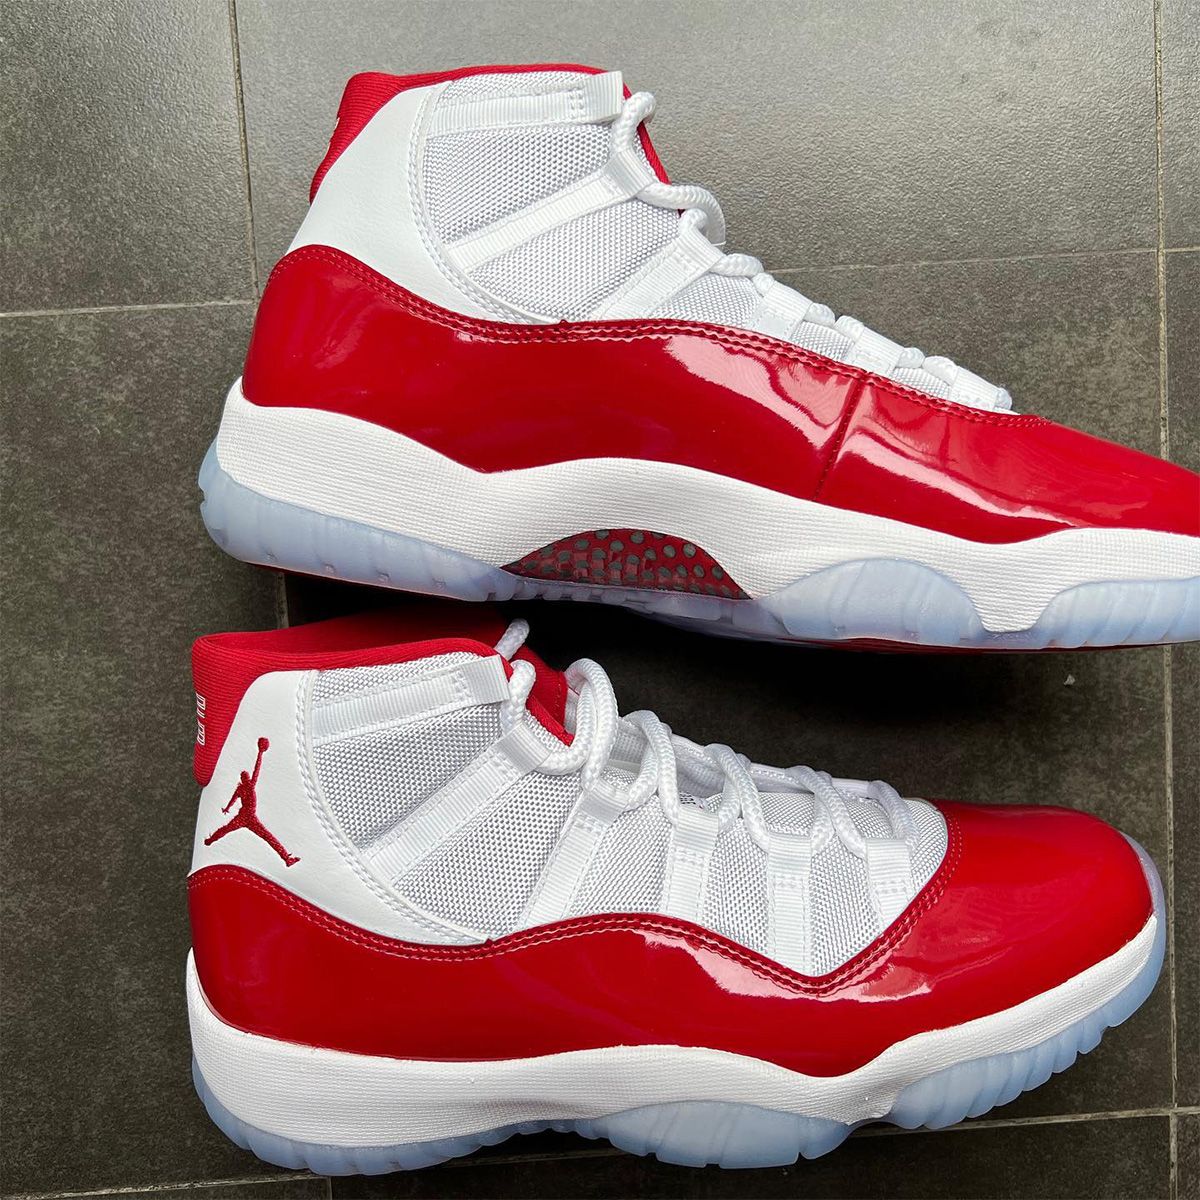 Official Images // Air Jordan 11 "Cherry" | HOUSE OF HEAT